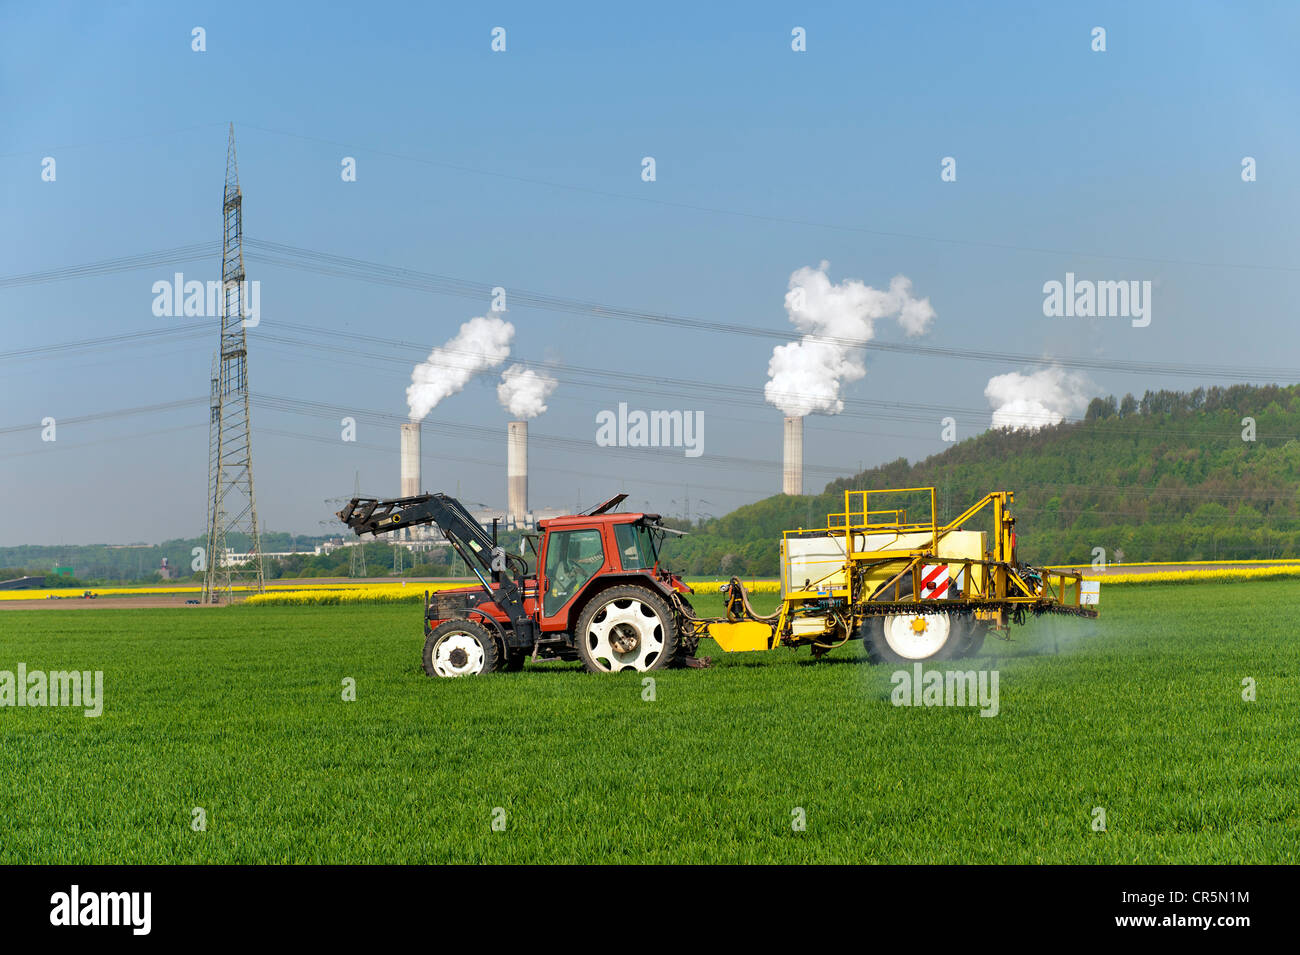 Tractor with trailer dispensing pesticides in a grain field, Grevenbroich, North Rhine-Westphalia, Germany, Europe Stock Photo